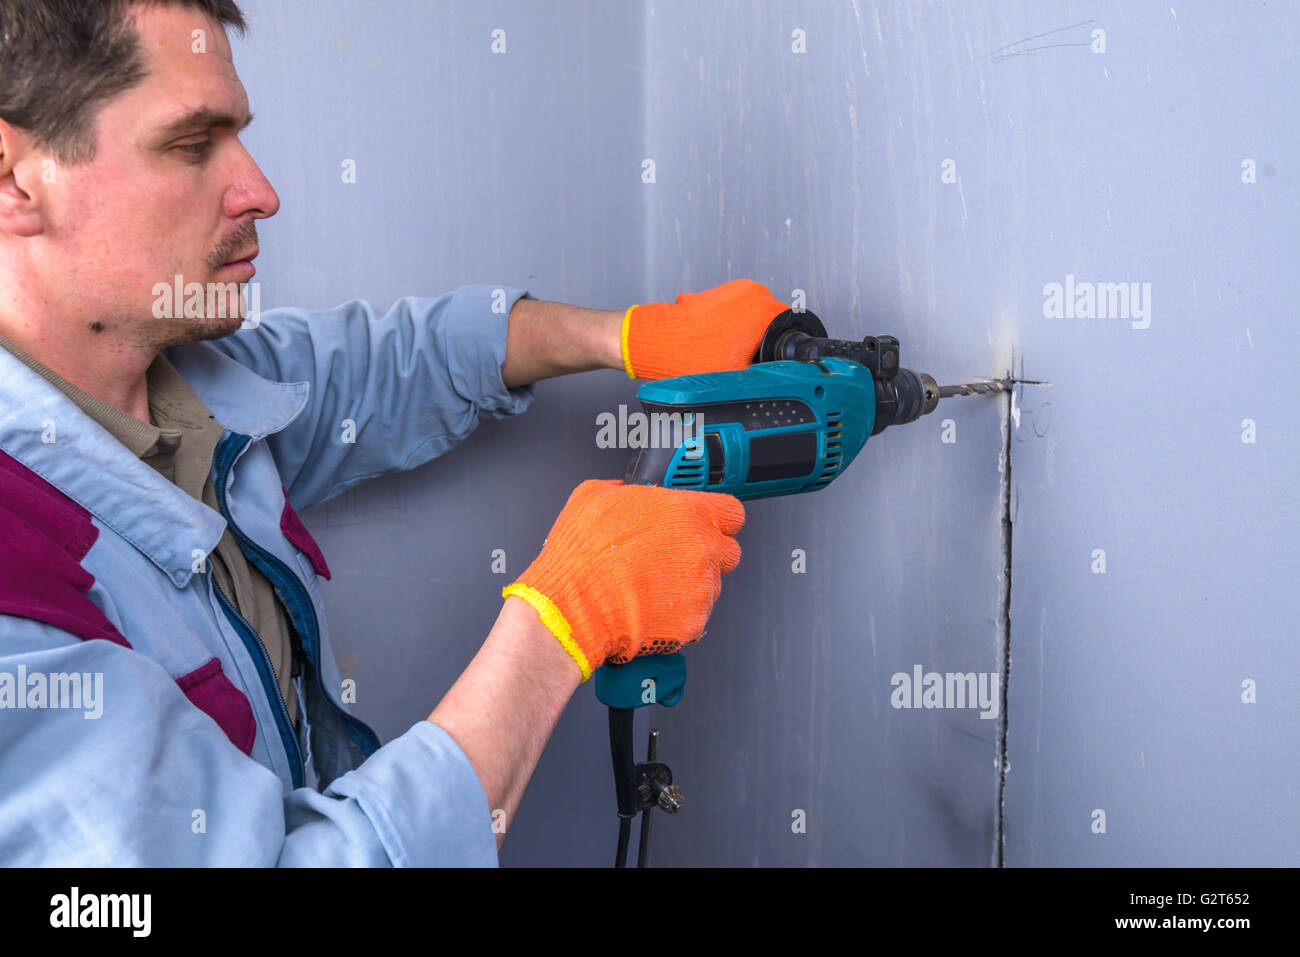 worker drills a wall in house Stock Photo